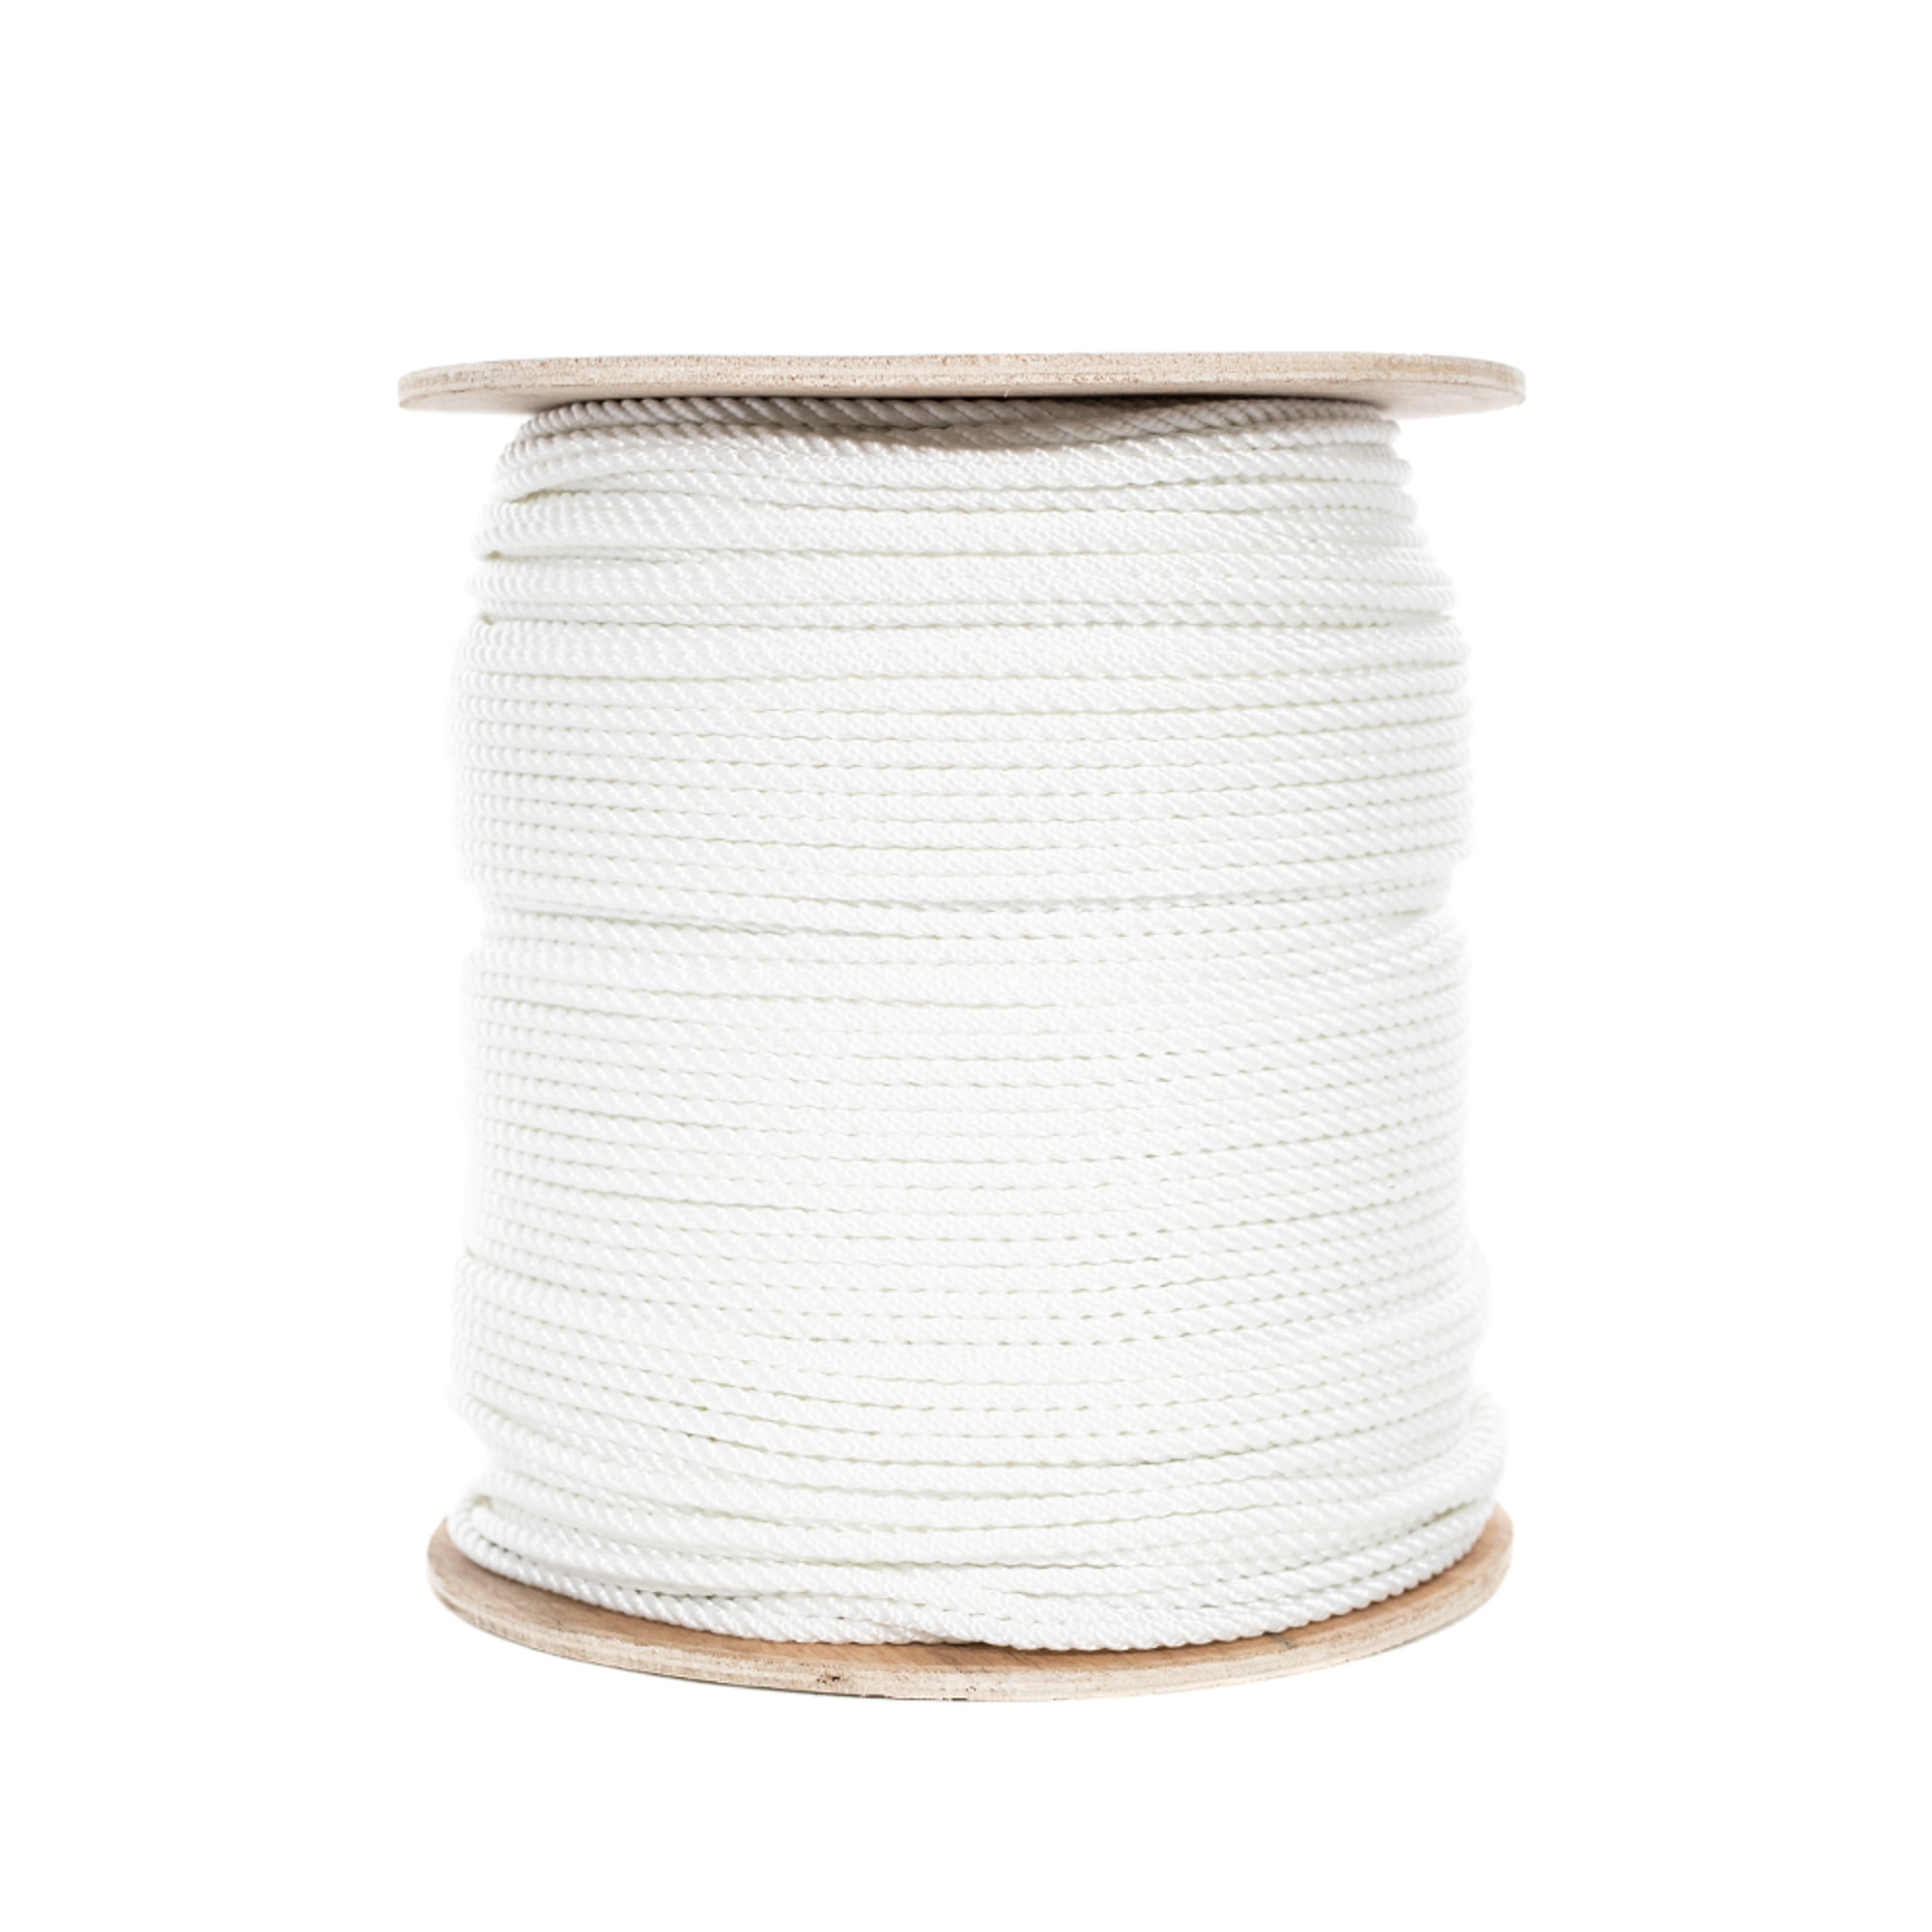 Moisture Golberg Twisted Polyester Rope High Strength Rot White String Line Crafts - Oil and Chemical Resistant Truck Rope Rigging Winch UV 1/2 Inch, 25 Feet Low Stretch 